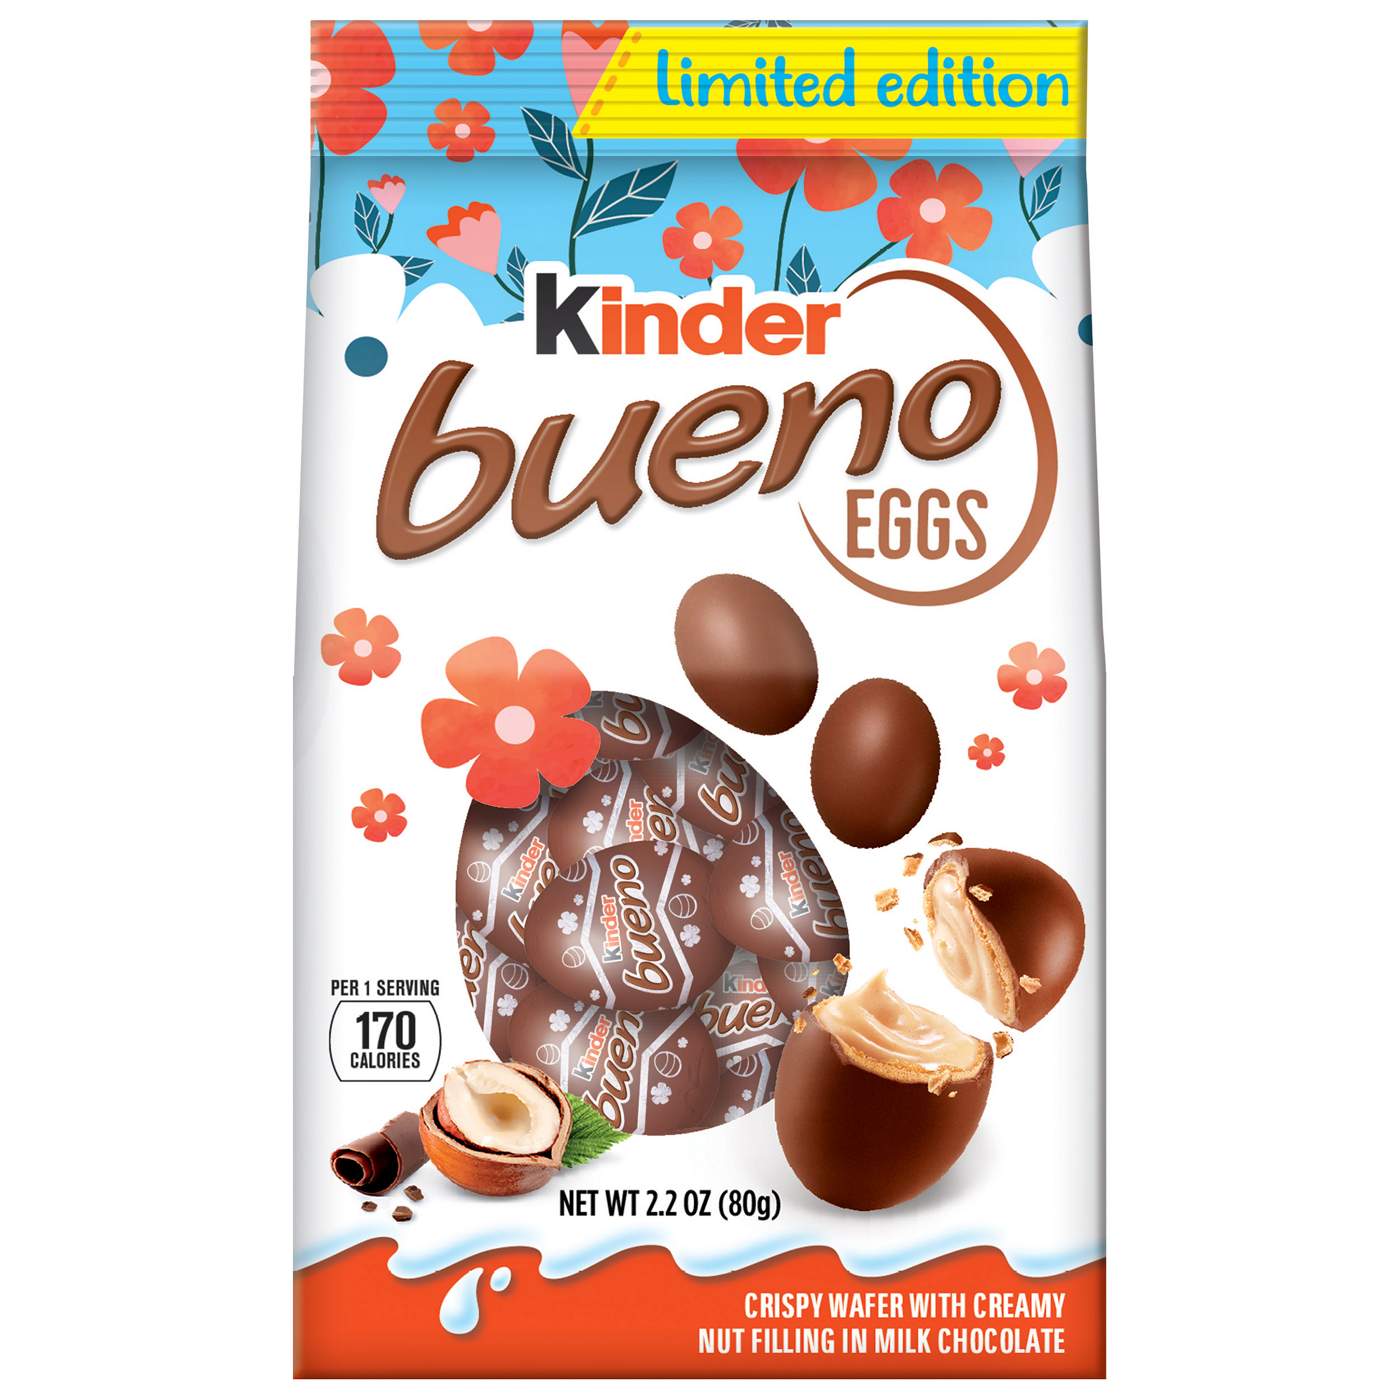 Kinder Bueno Eggs Easter Candy; image 1 of 3